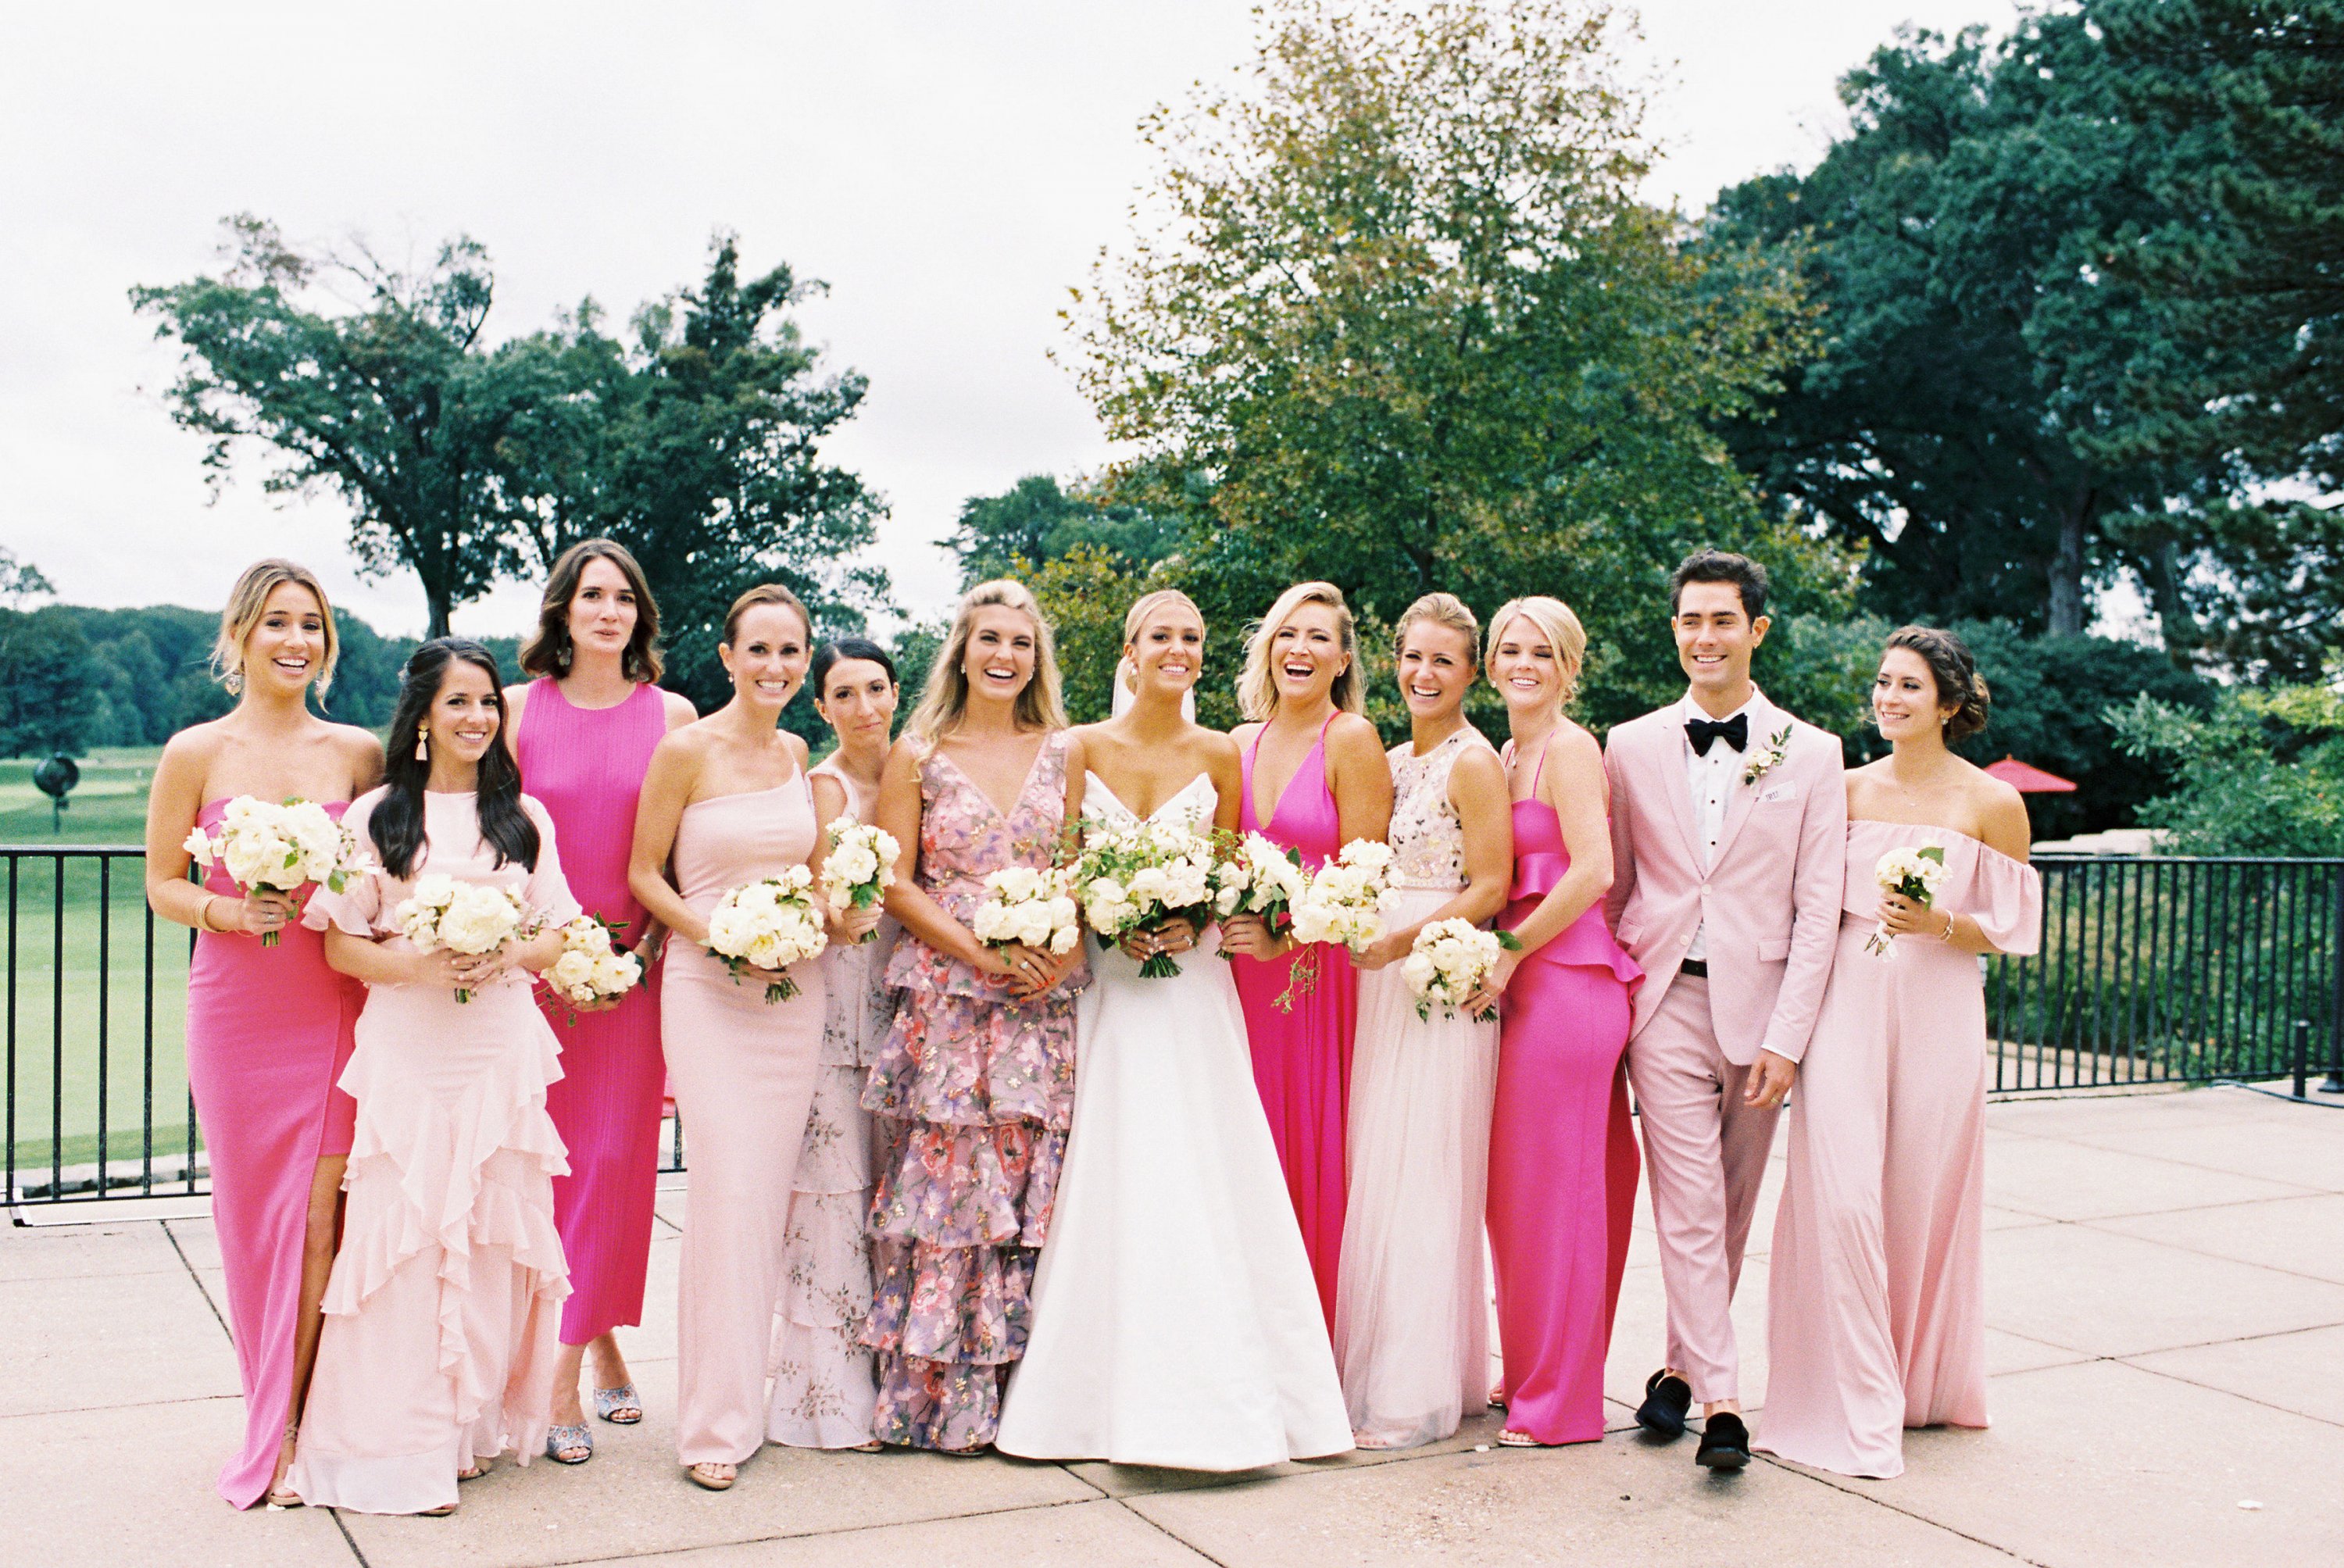 These Sparkly Floral and Hot Pink Bridesmaids Dresses Take Mix-and-Match  Gowns to the Next Level - Washingtonian